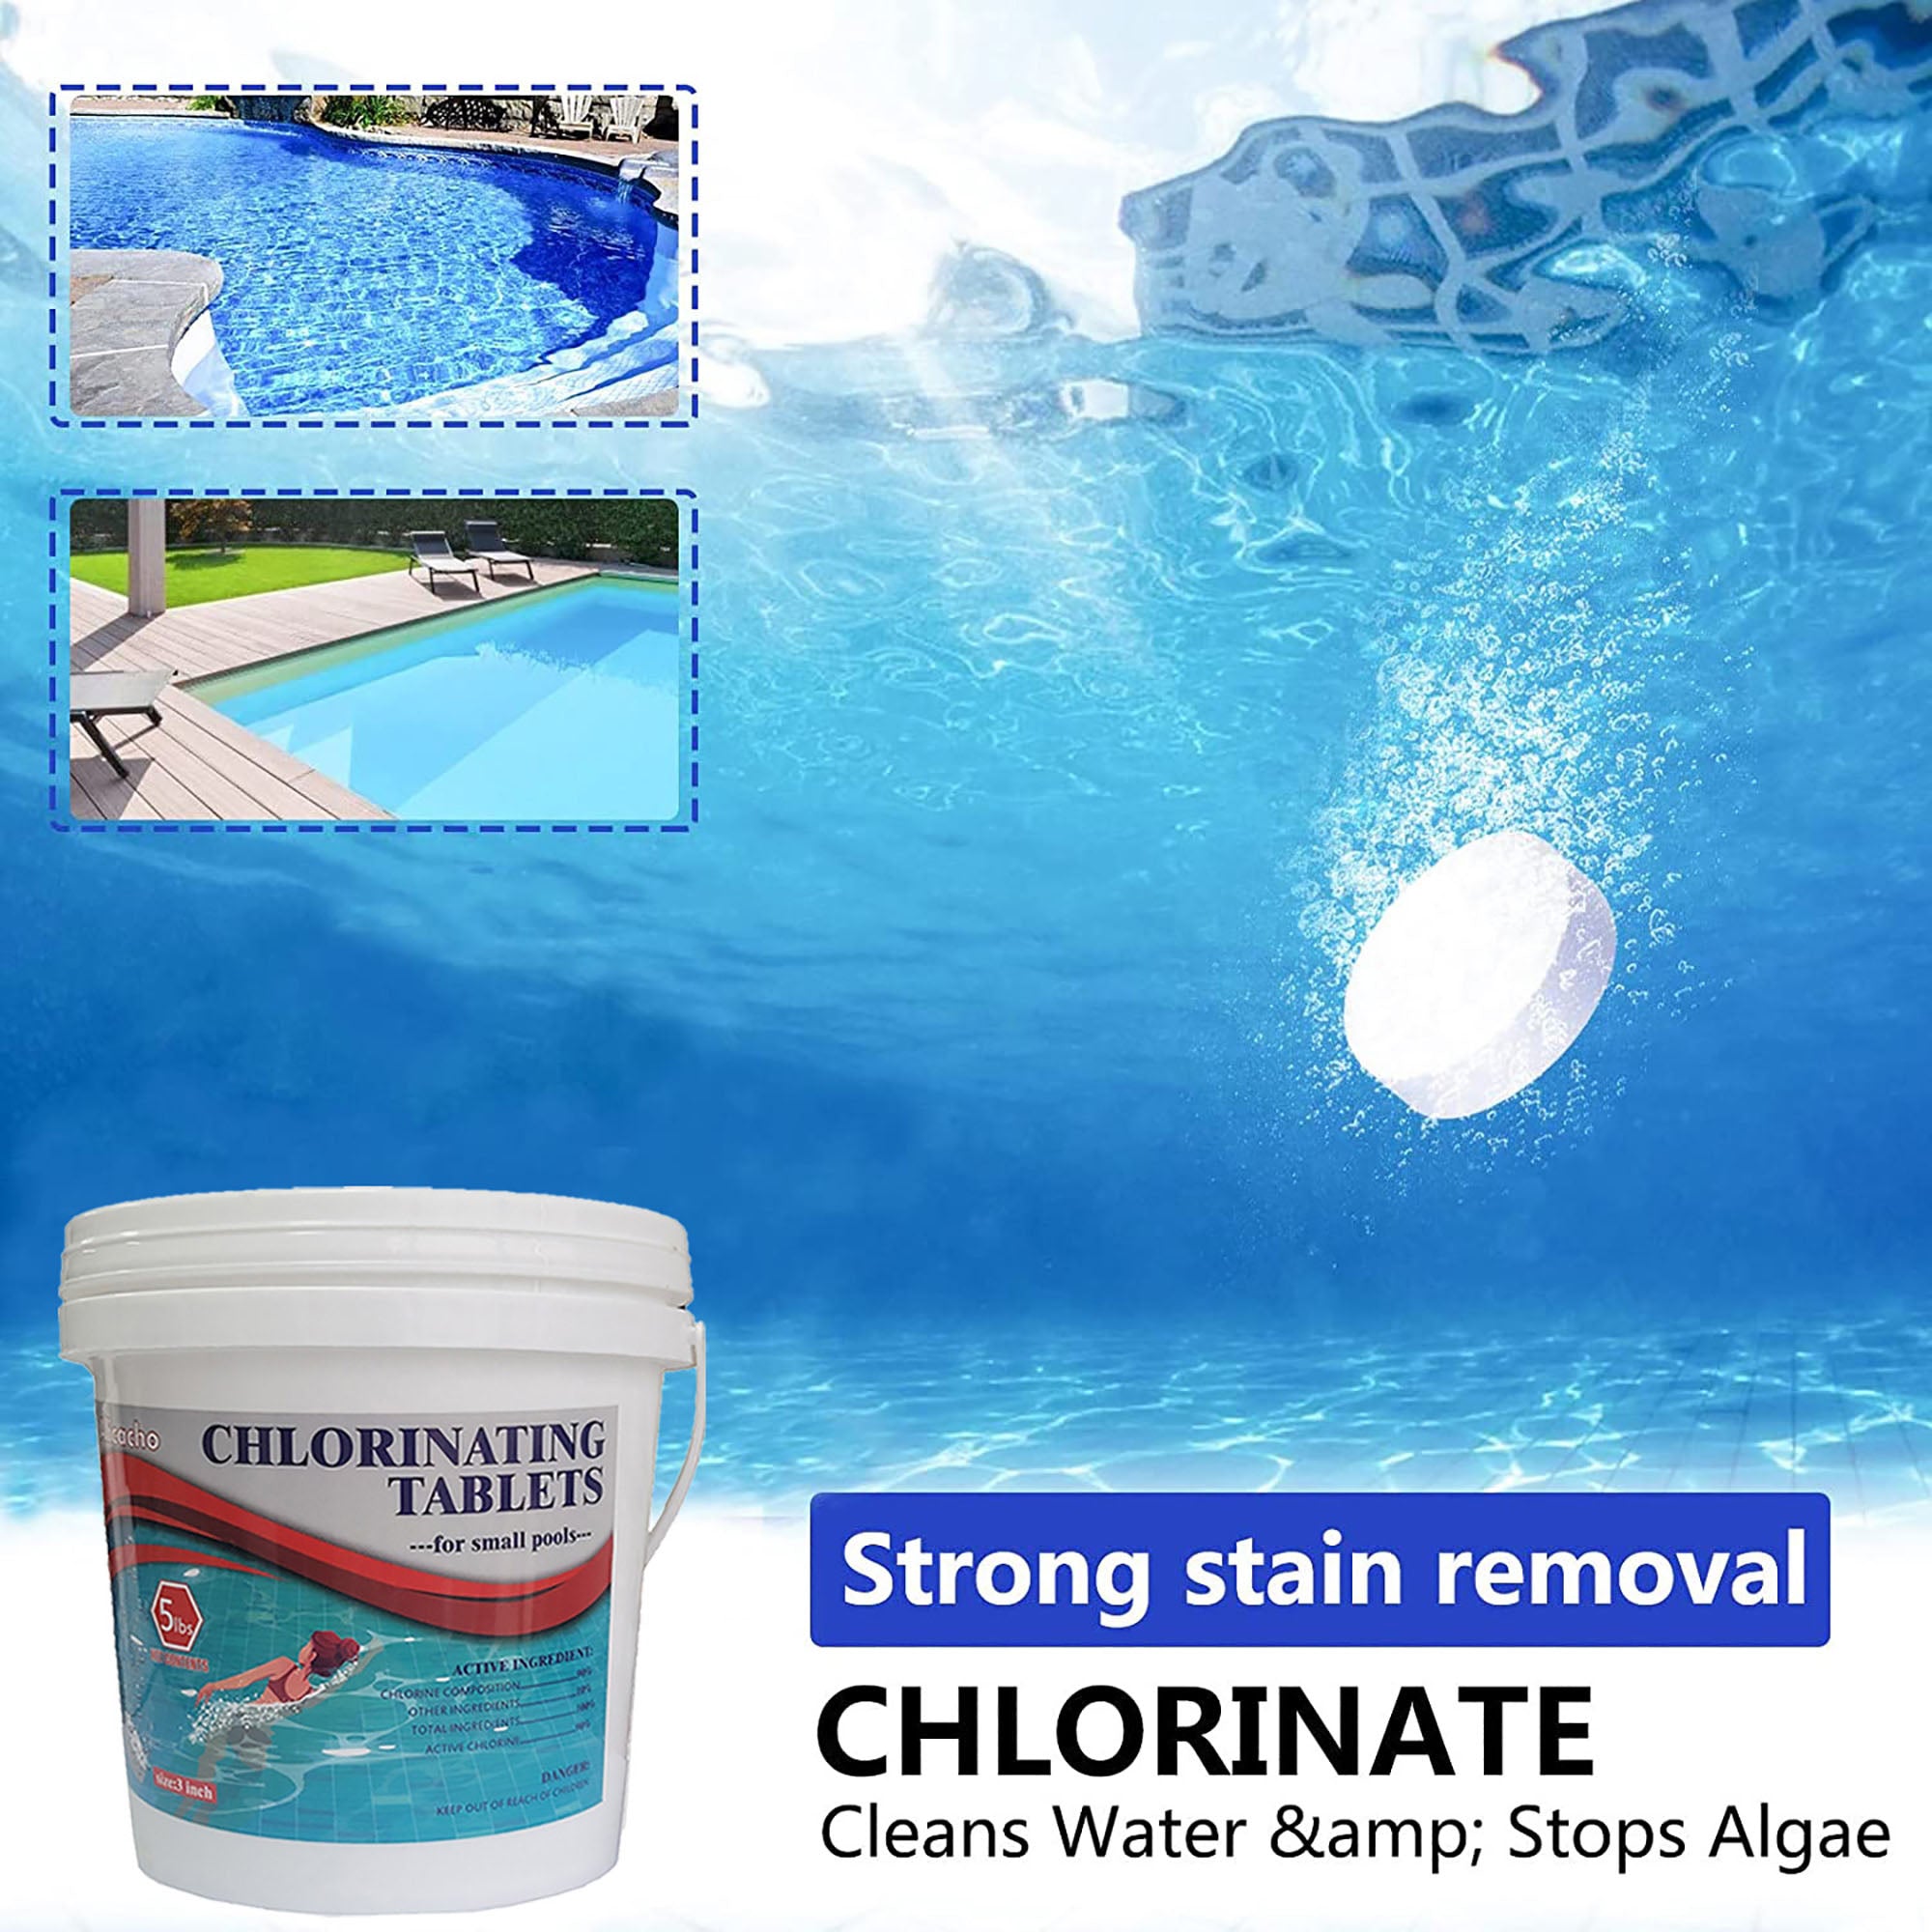 What Chemicals Do Professional Pool Cleaners Use?